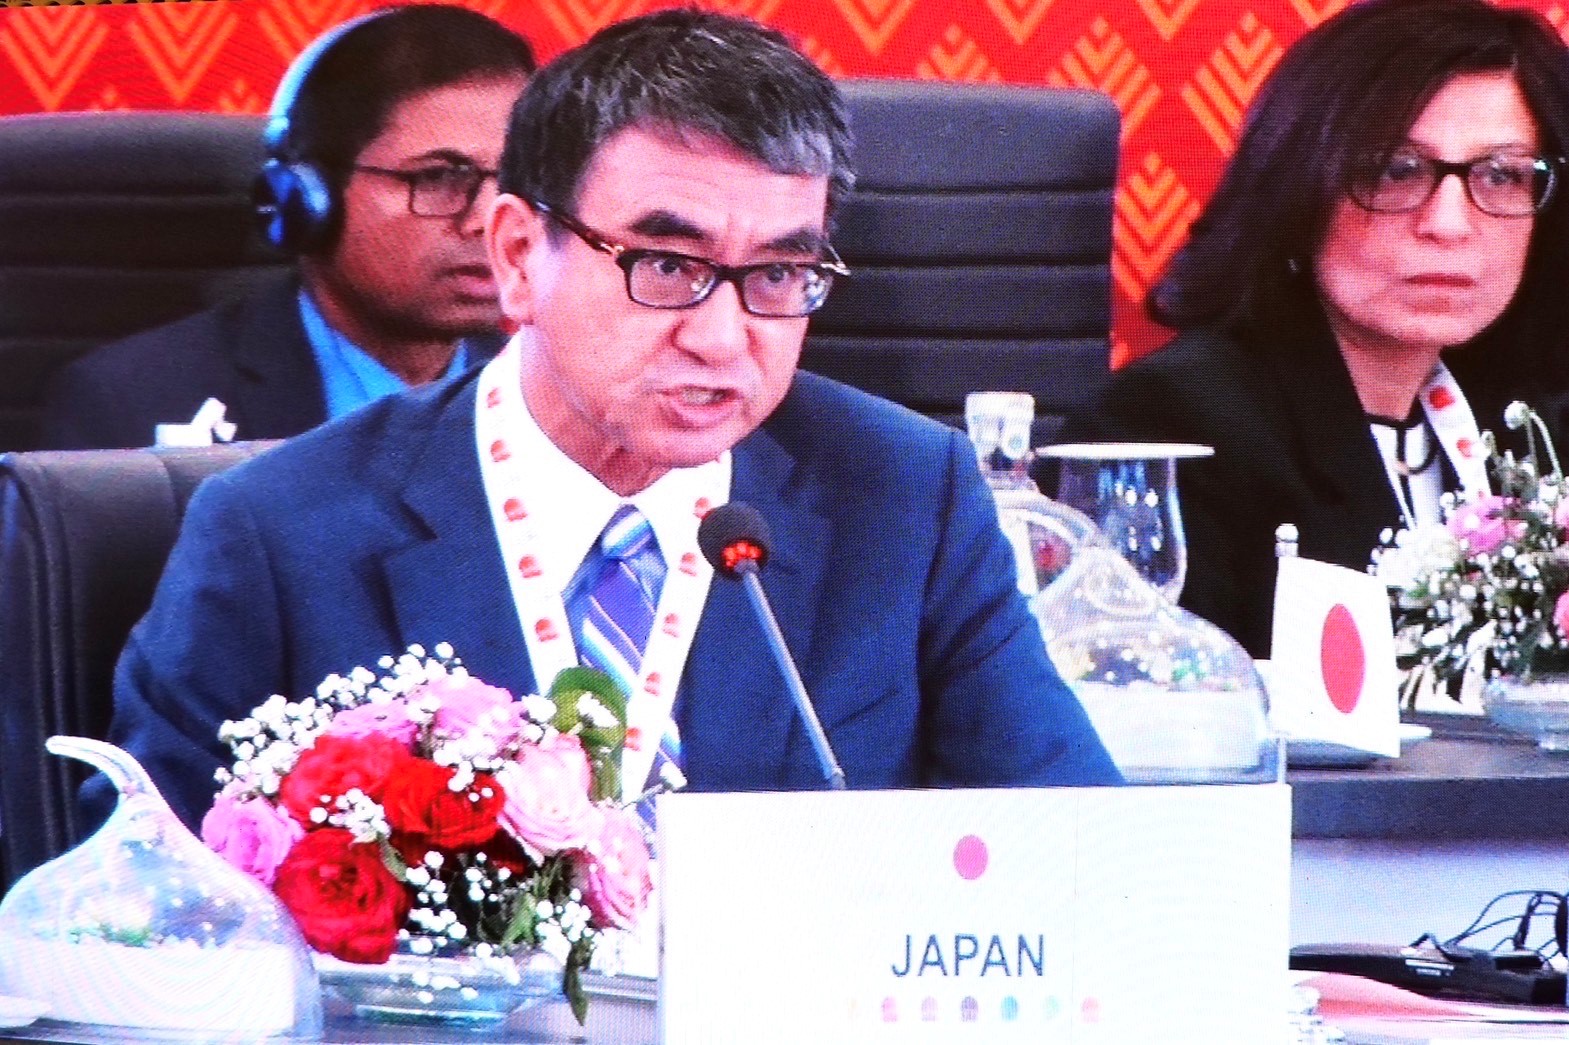 Minister Kono making remarks at the G20 Digital Economy Ministers Meeting.